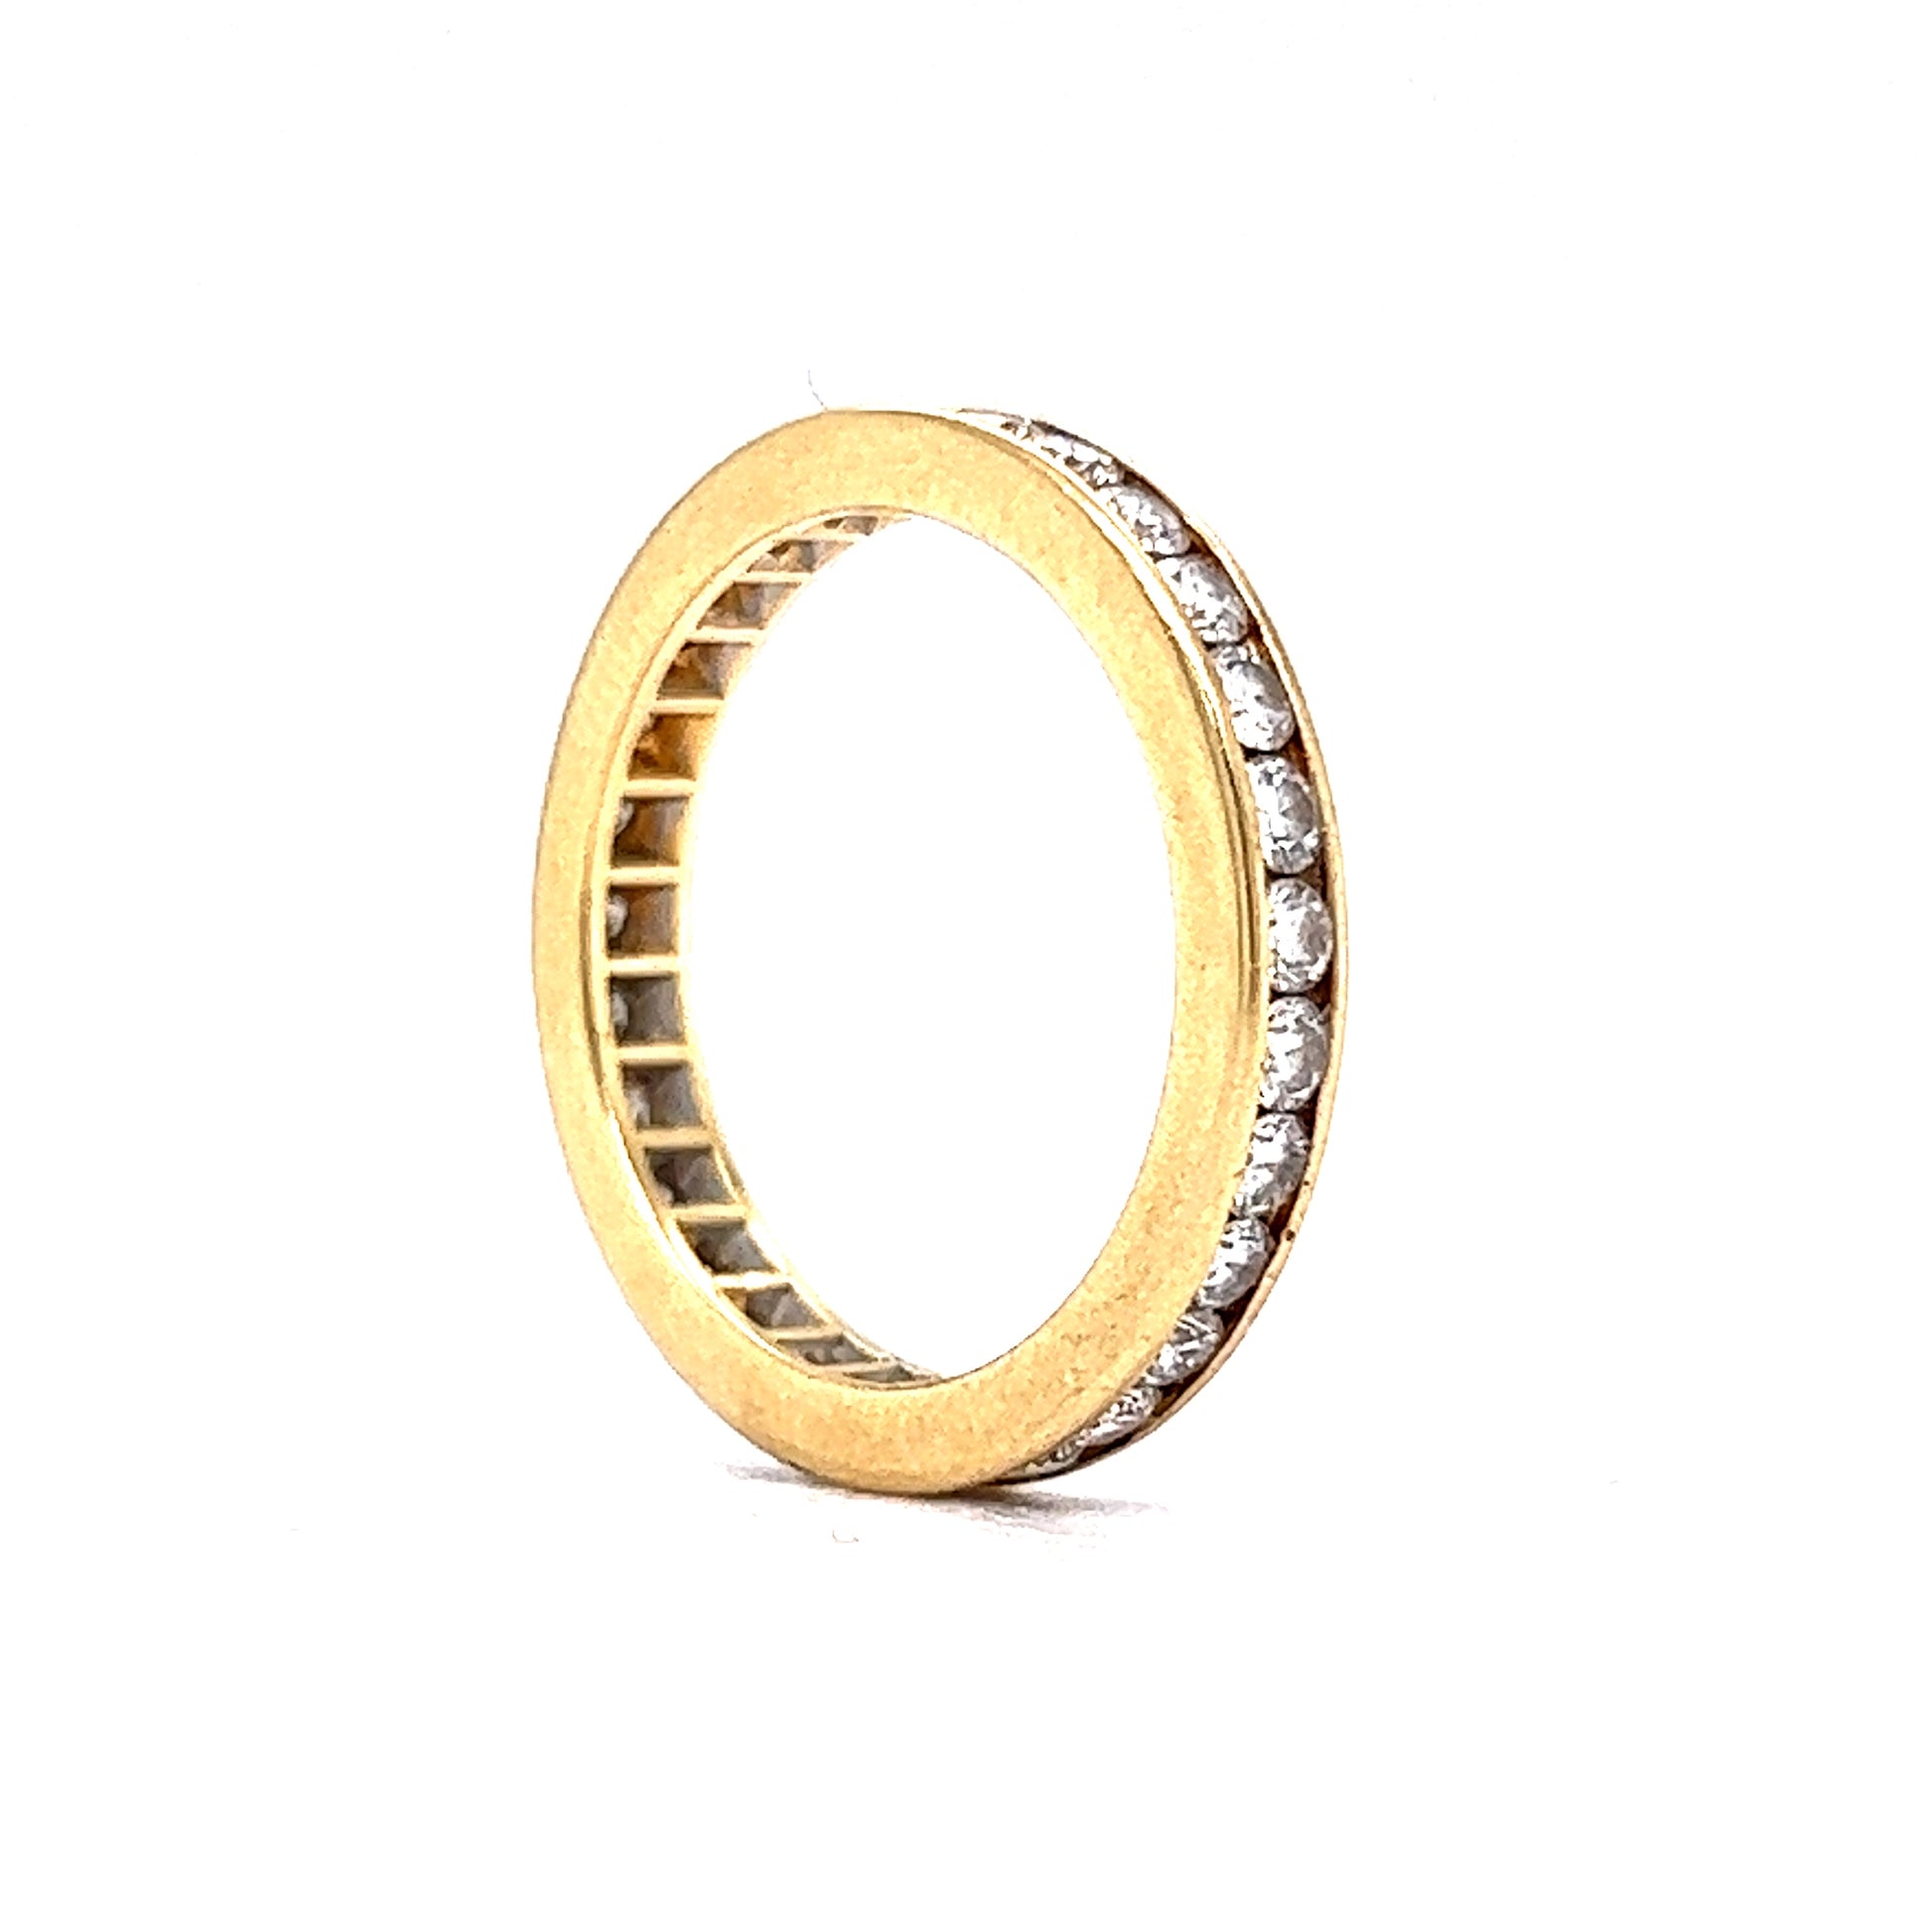 .90 Channel Set Diamond Eternity Band in 18k Yellow GoldComposition: 18 Karat Yellow GoldRing Size: 6Total Diamond Weight: .90 ctTotal Gram Weight: 3.3 gInscription: SBI 18K